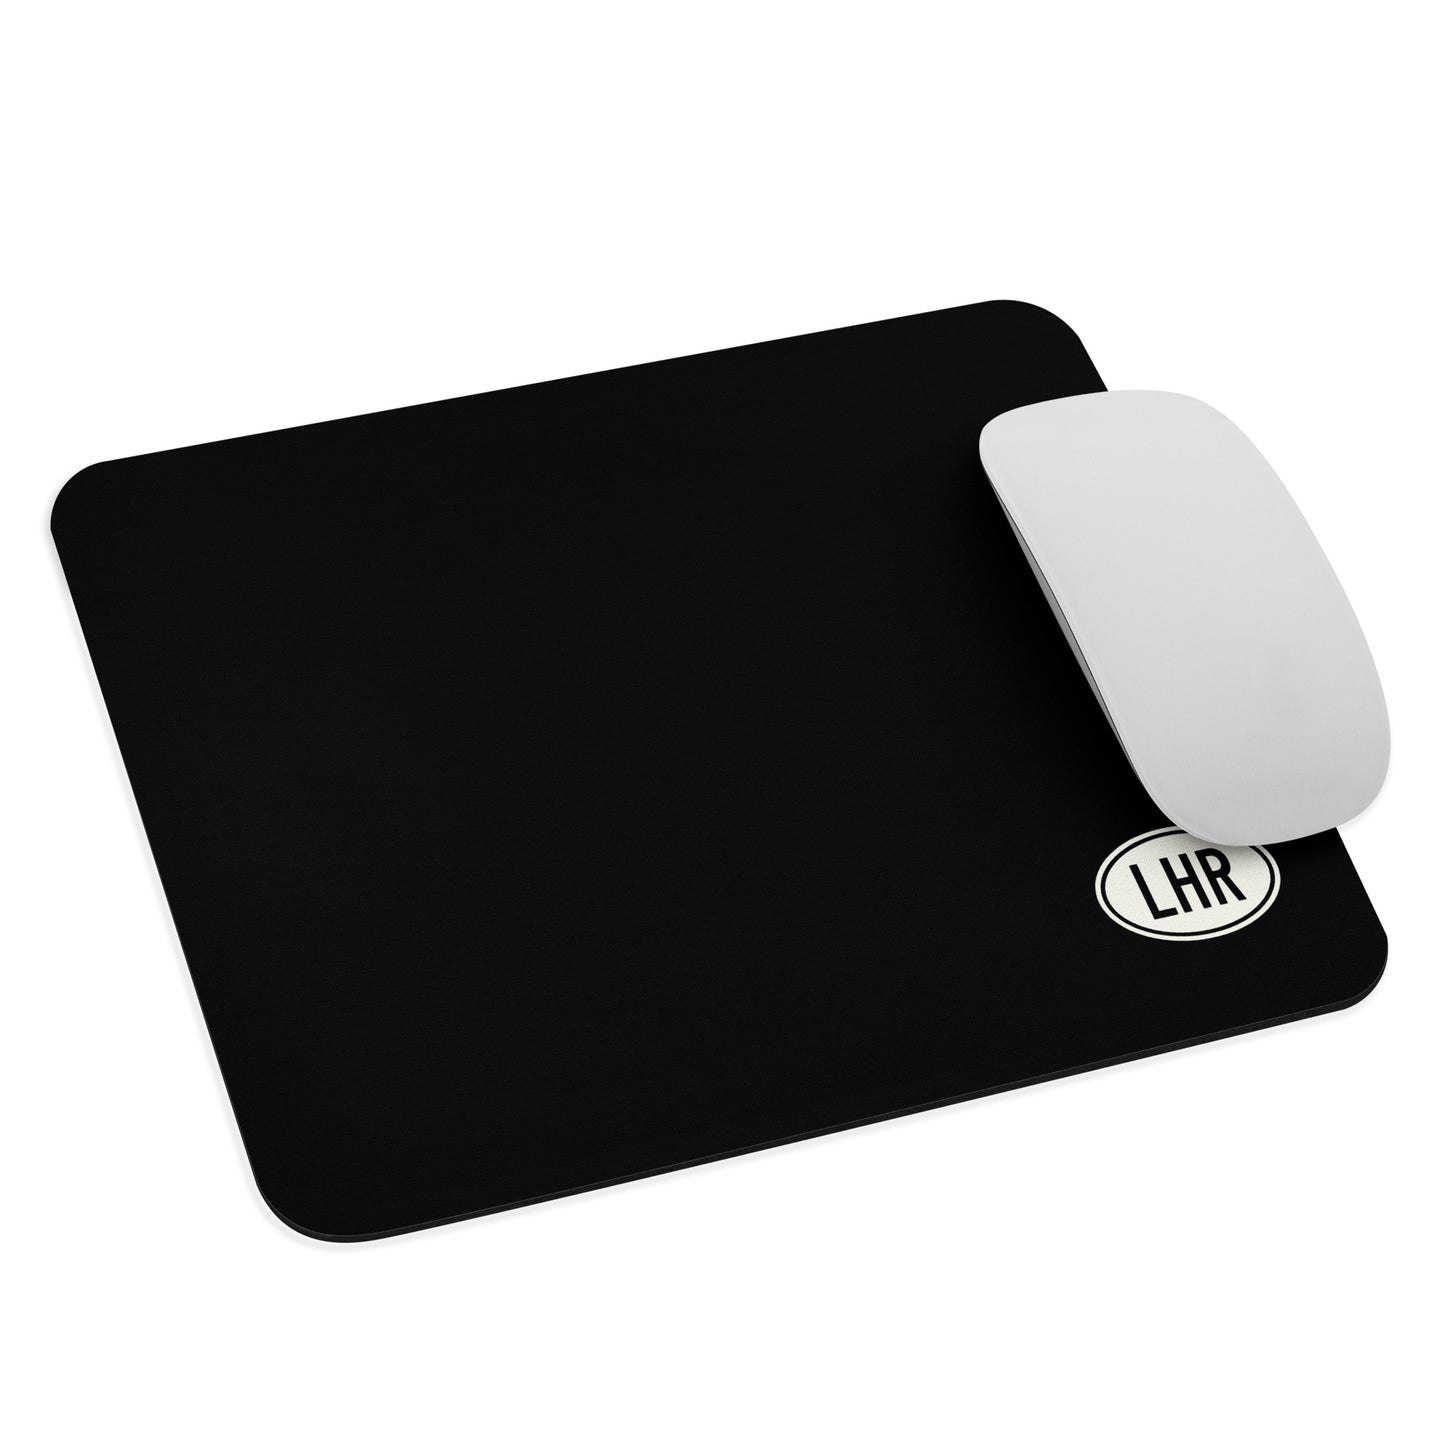 Unique Travel Gift Mouse Pad - White Oval • LHR London • YHM Designs - Image 03